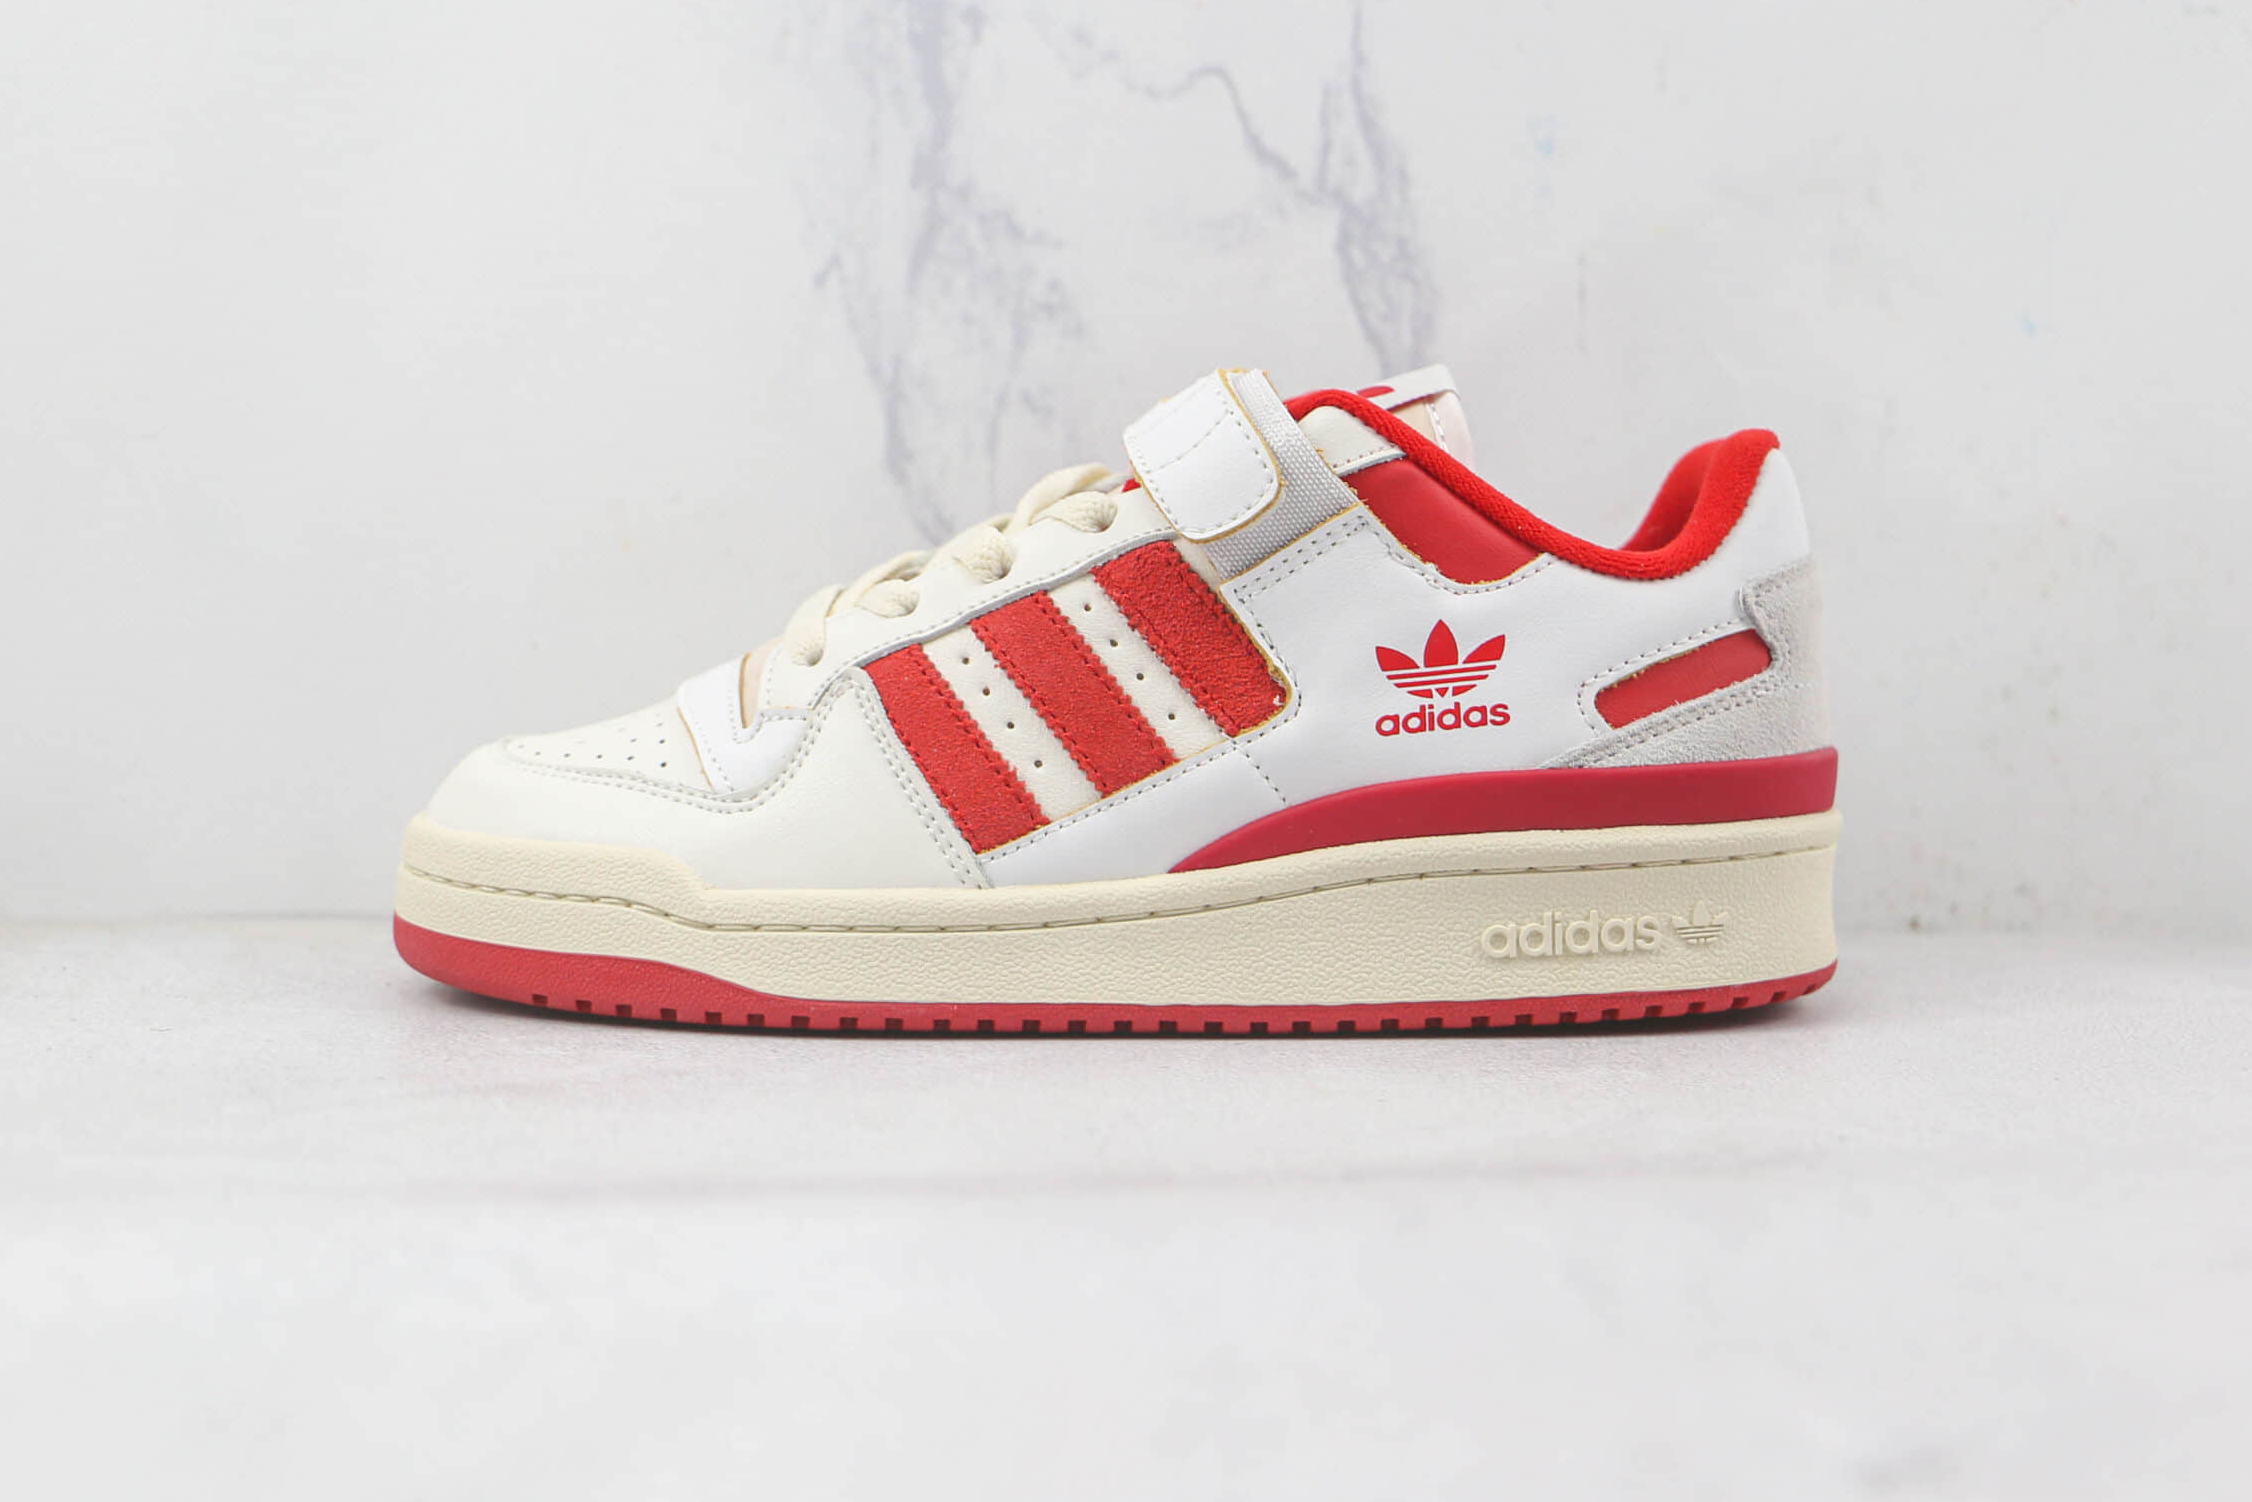 Adidas Forum 84 Low 'Team Power Red' GY6981 - Latest Release for Sneaker Enthusiasts